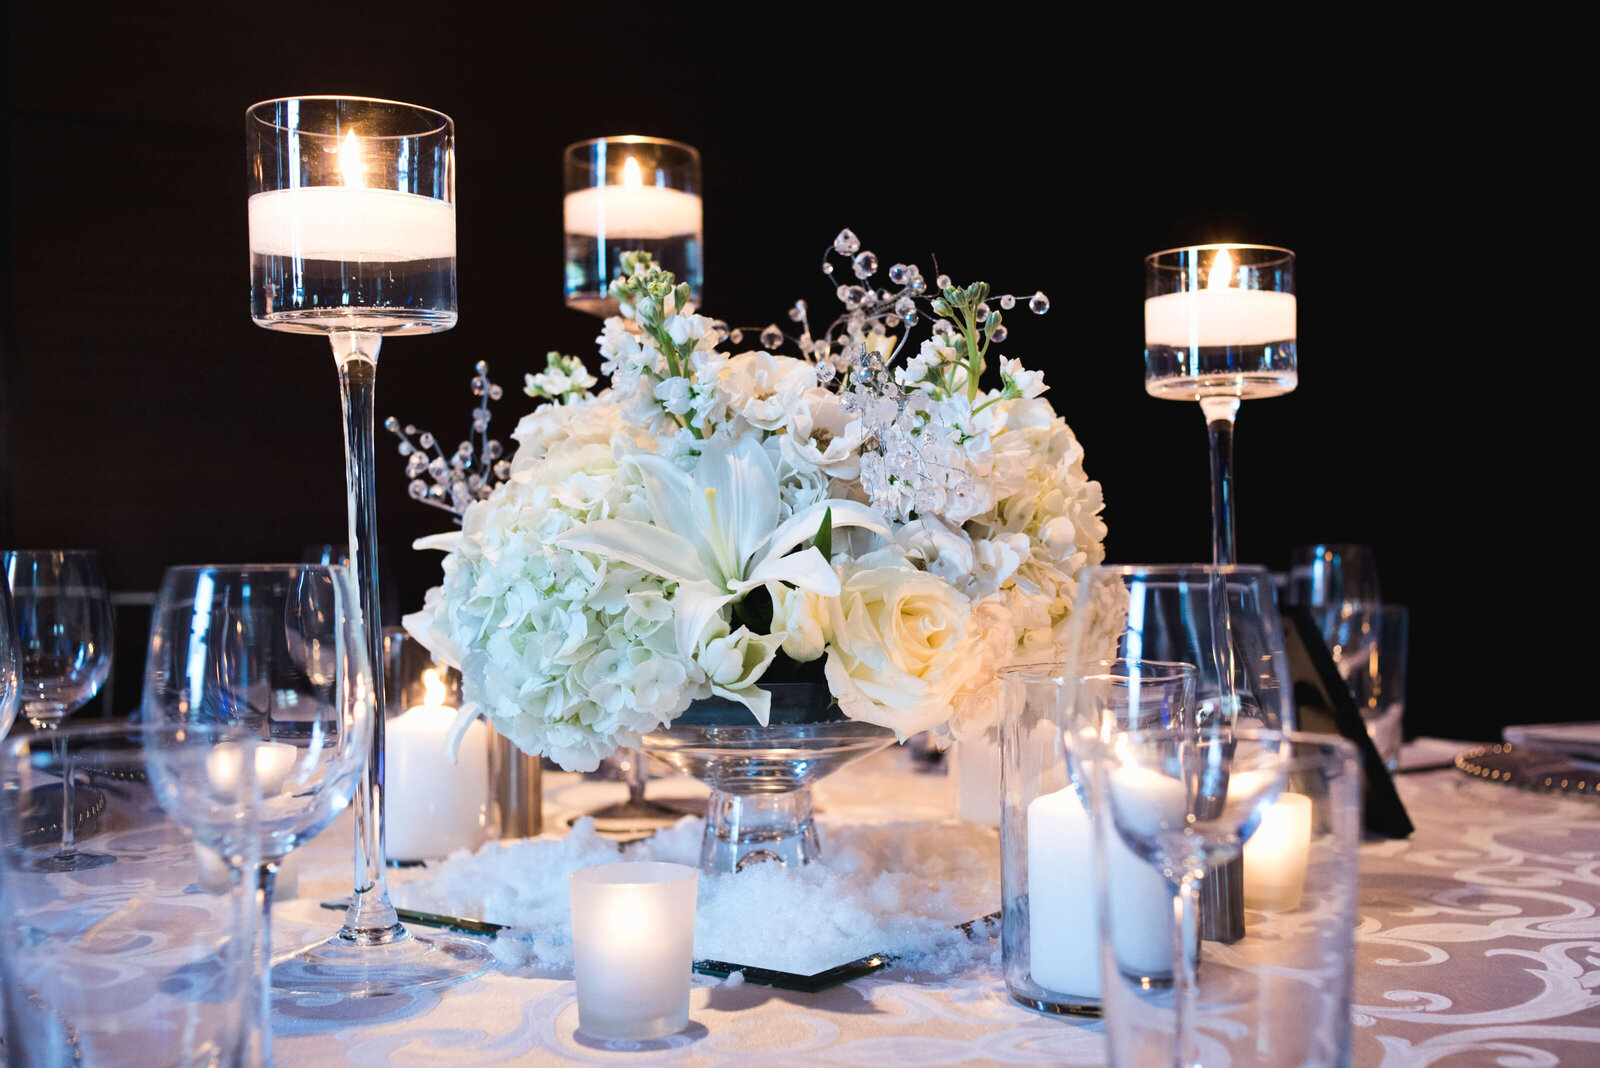 Lighted candles and floral centerpiece